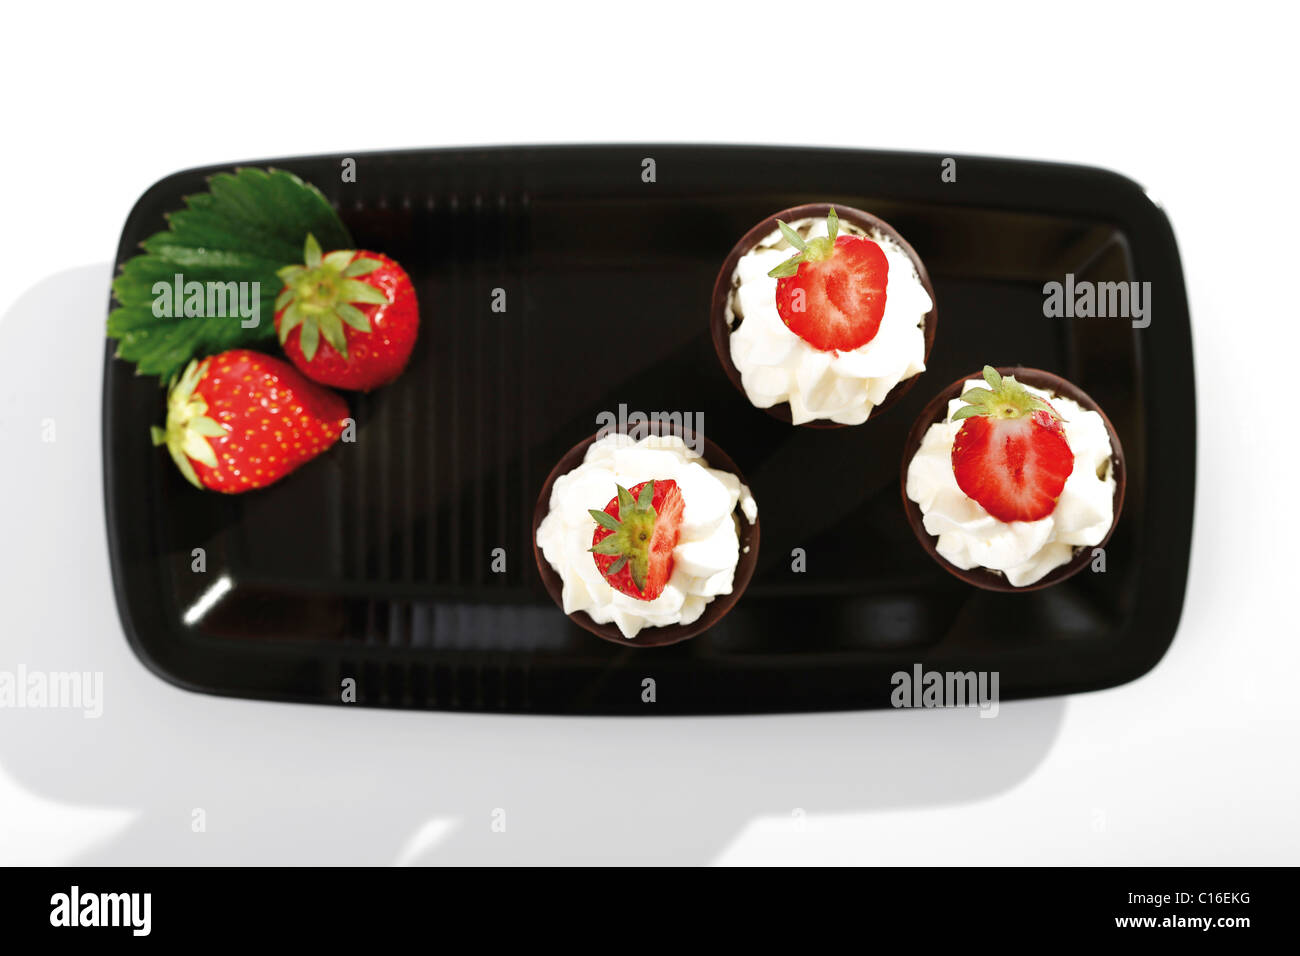 Three wafer cones with cream and strawberries on a black tray Stock Photo